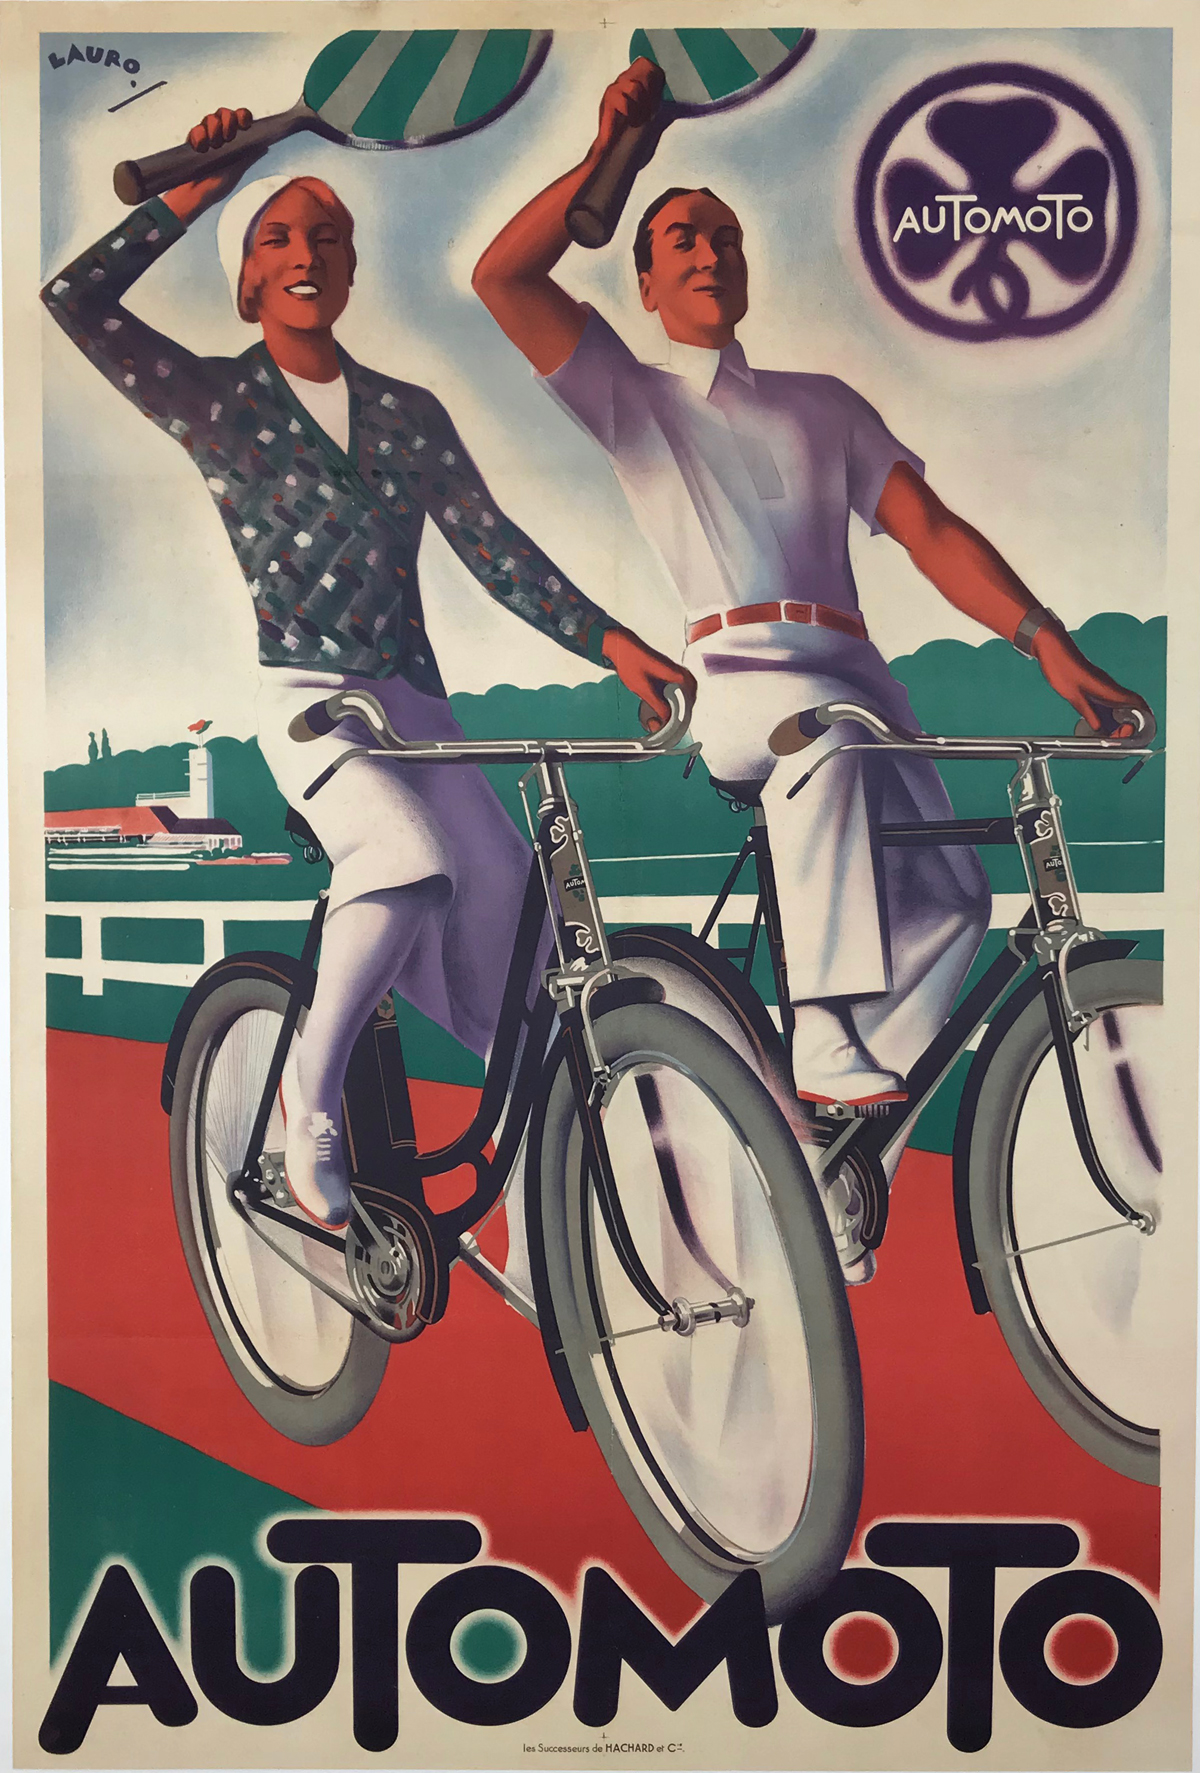 Automoto original vintage cycles motorcycles poster from 1928 France by Lauro. Great art deco transportation advertisement.